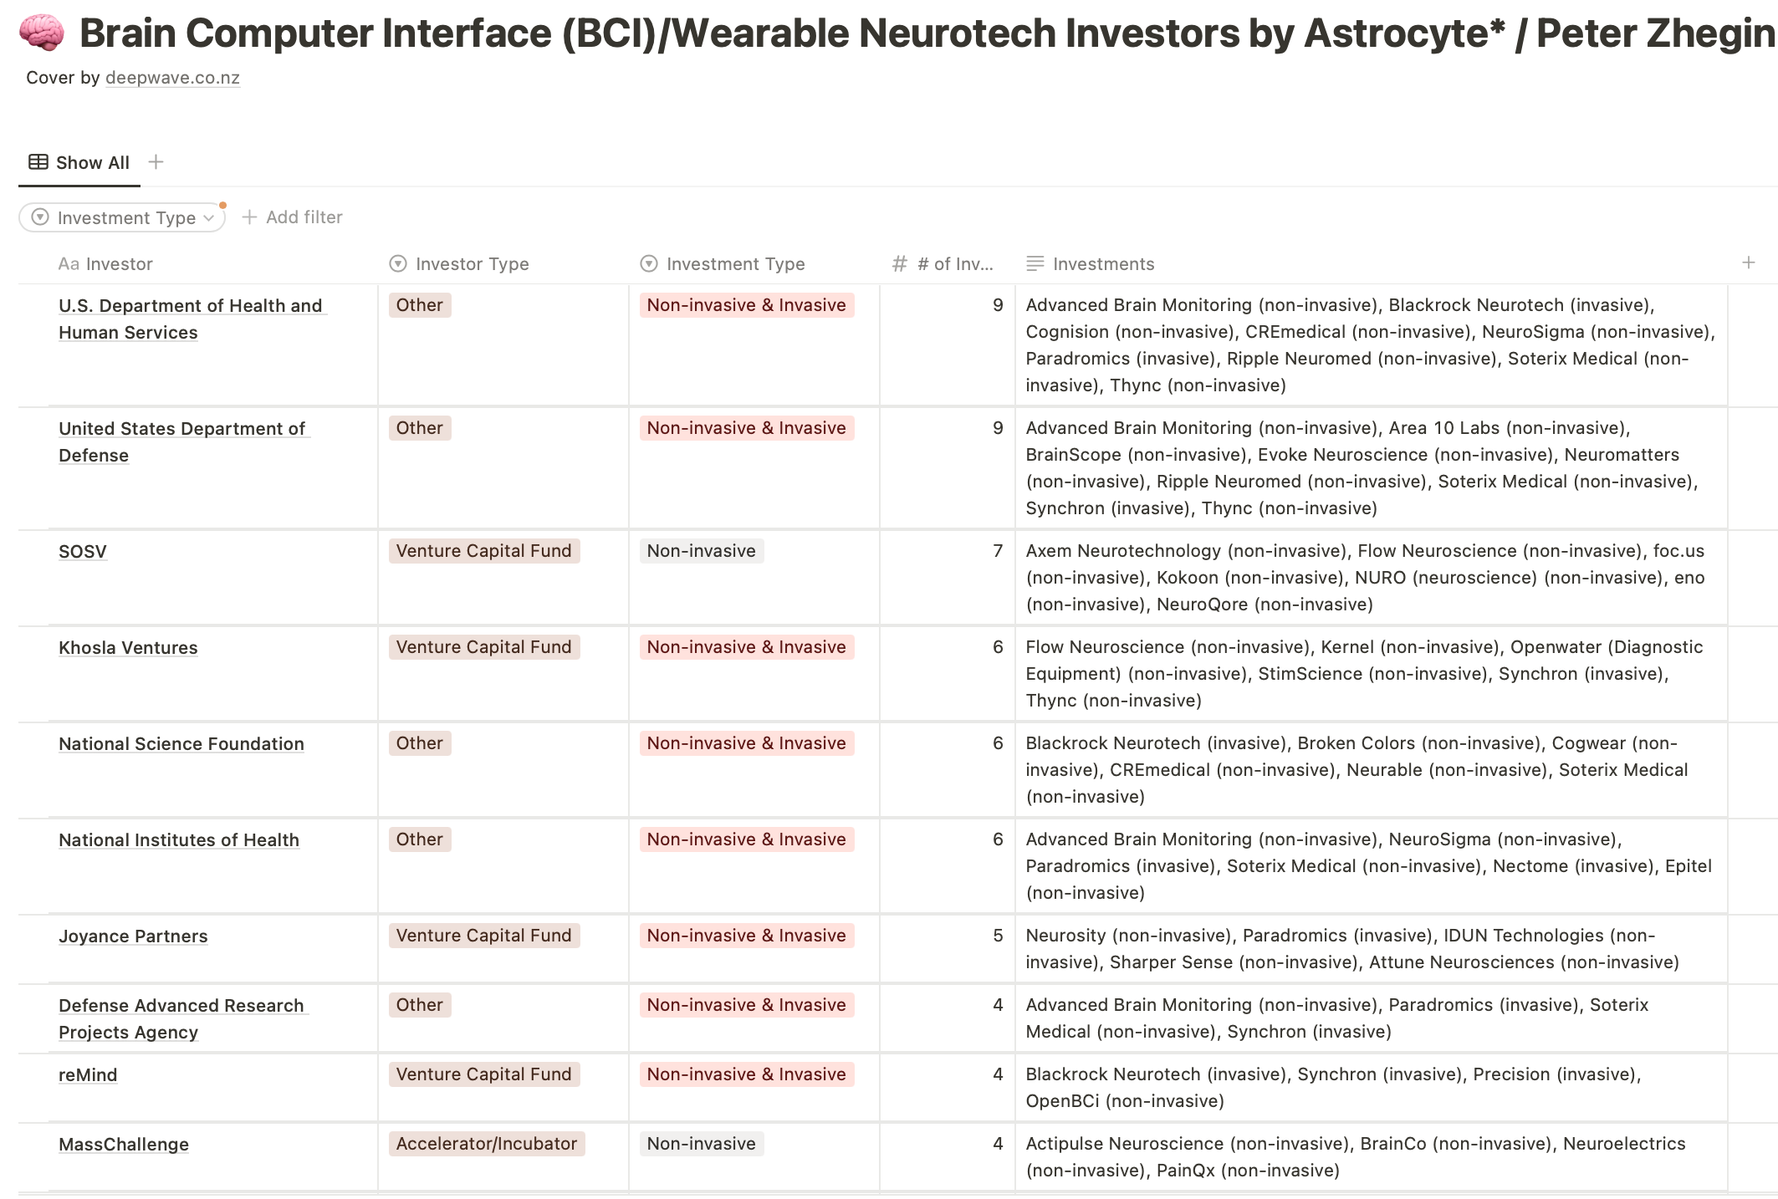 Brain-computer interfaces funding frontier: seventy active investors and their bets (2023)